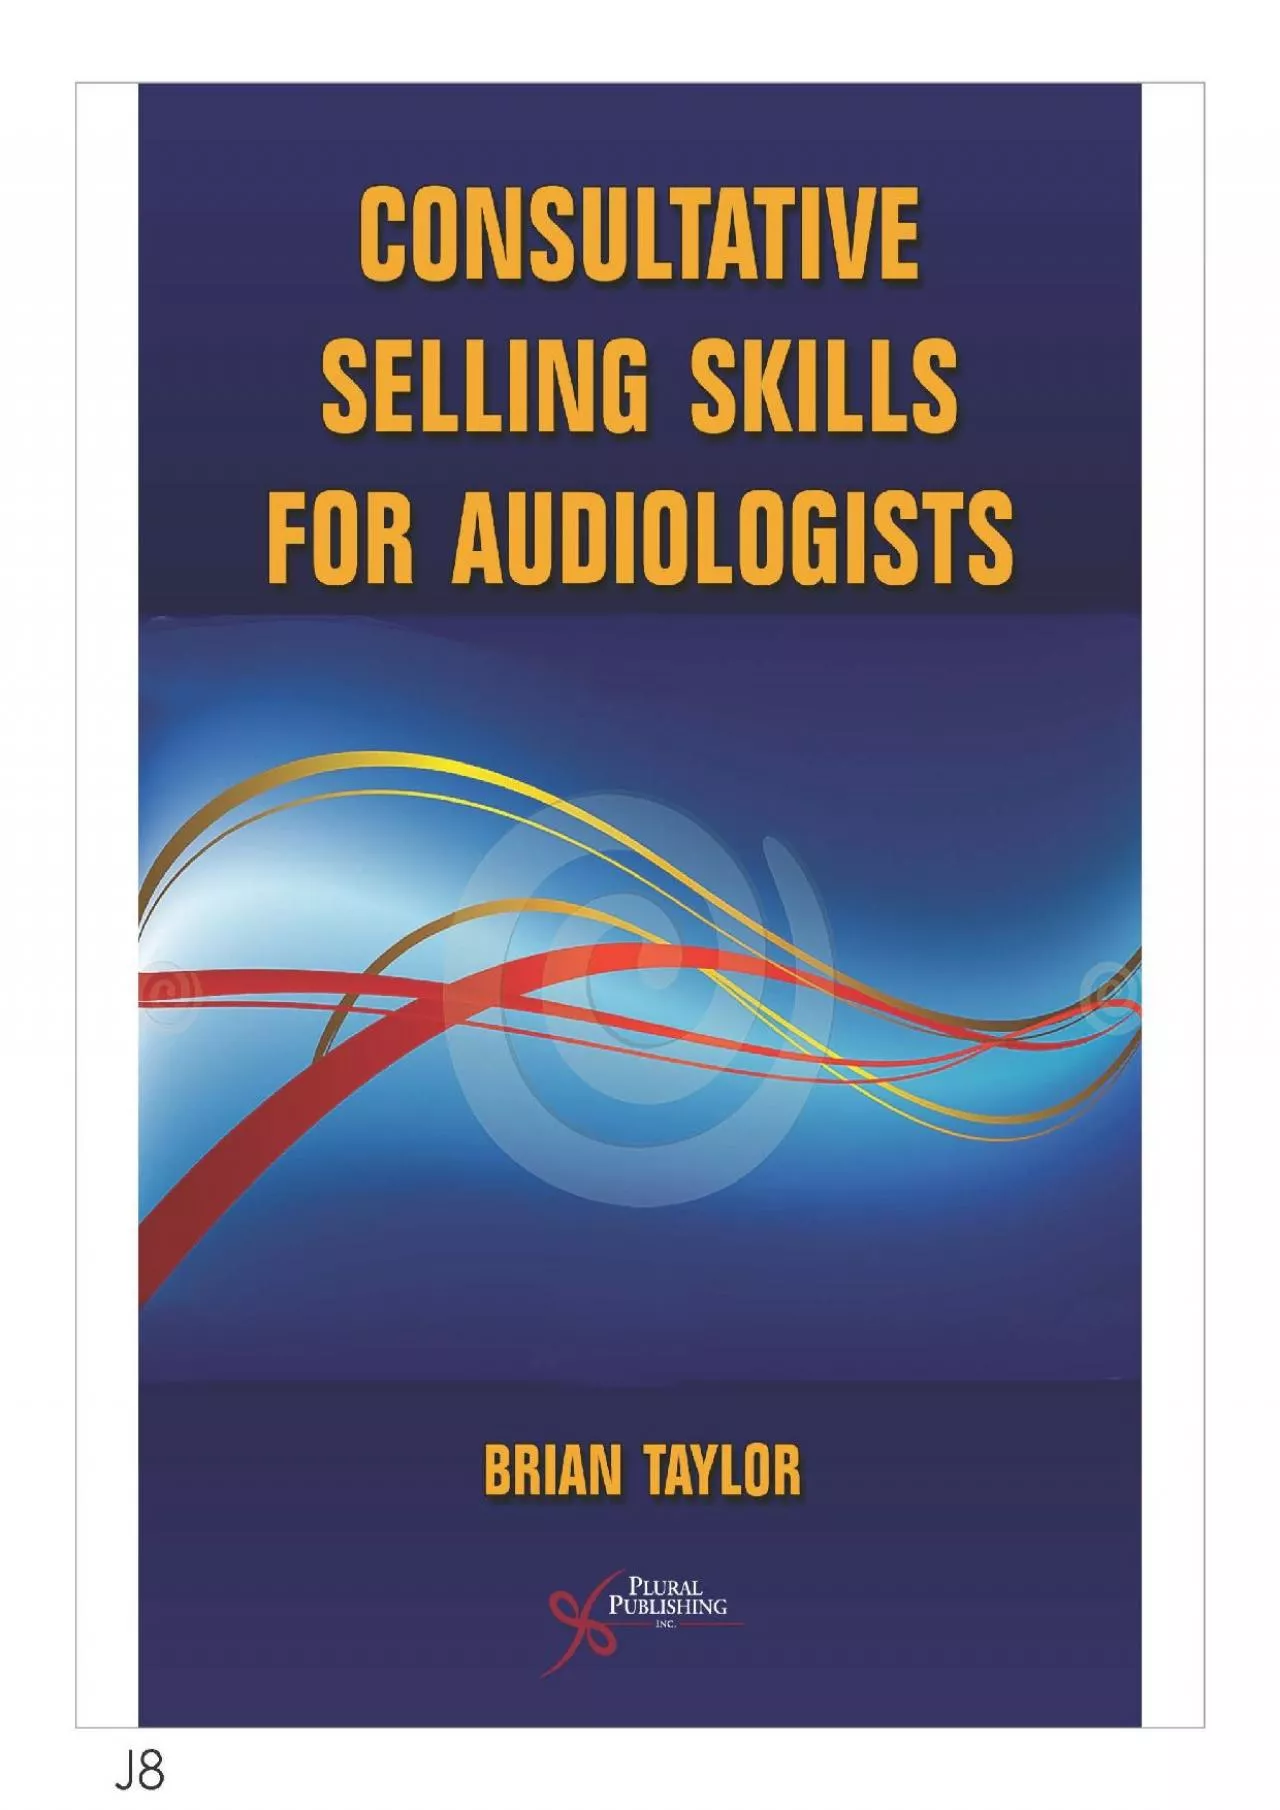 (BOOK)-Consultative Selling Skills for Audiologists